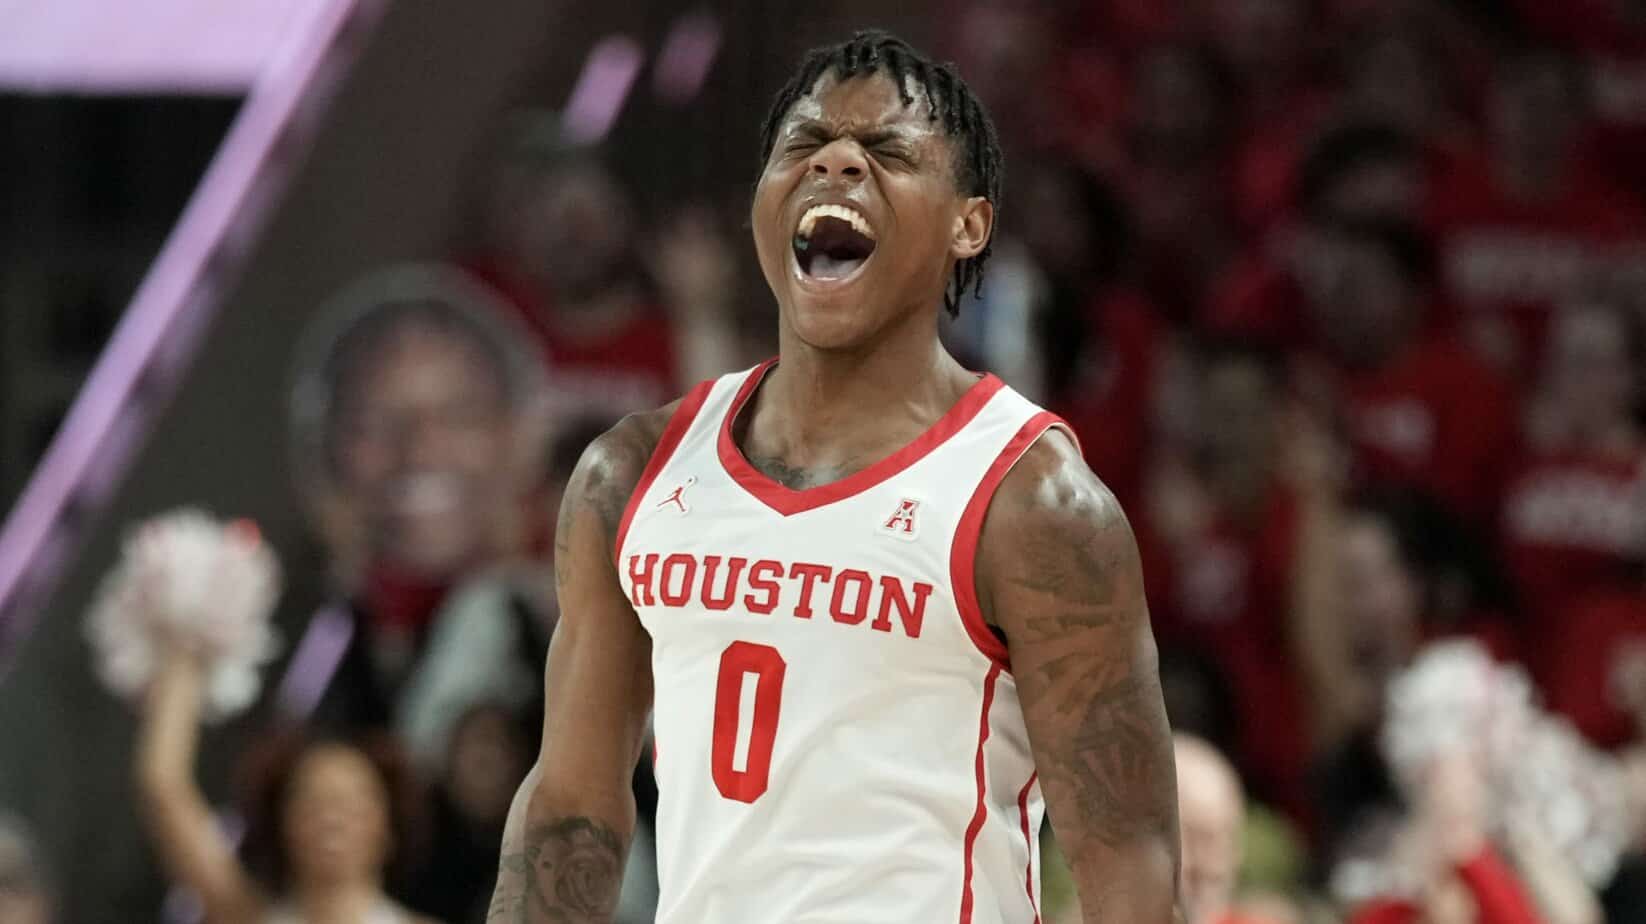 Stokastic runs over some of the best NBA DFS contrarian picks and plays for daily fantasy basketball lineups, including Marcus Sasser...